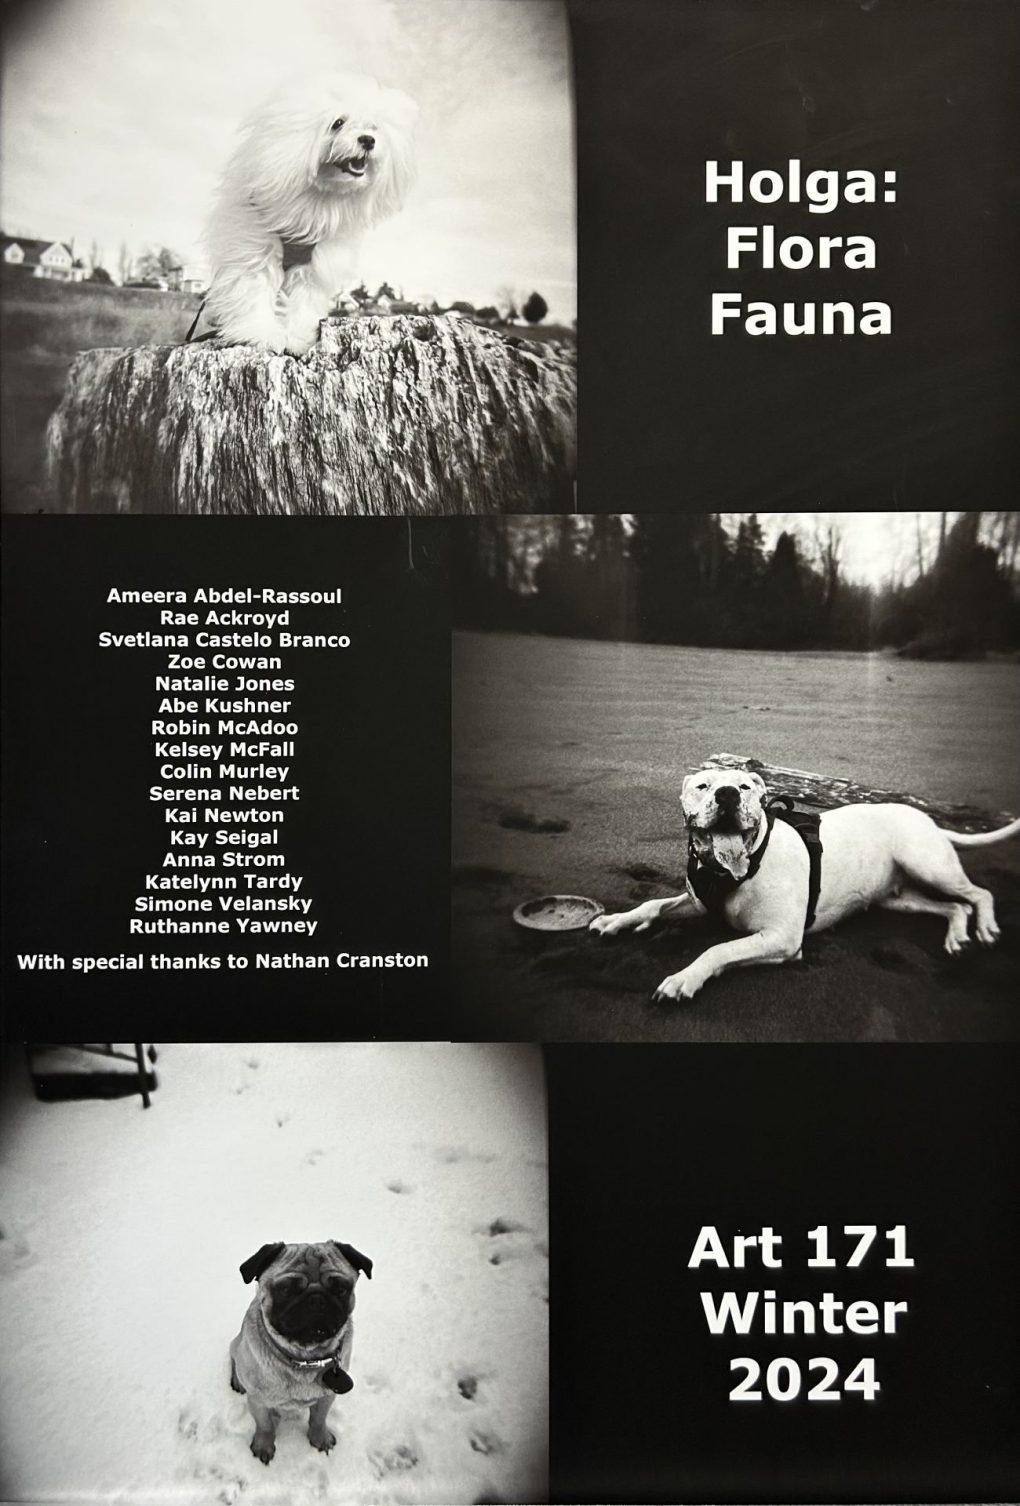 The poster for the show, features three black and white photos of dogs across the page. It's titled "Holga: Flora Fauna", it gives the information: "Art 171 Winter 2024" and lists all the student names associated with the show: "Ameera Abdel-Rassoul, Rae Ackroyd, Svetlana Castelo Branco, Zoe Cowan, Natalie Jones, Abe Kushner, Robin McAdoo, Kelsey McFall, Colin Murley, Serena Nebert, Kai Newton, Kay Seigal, Anna Strom, Katelynn Tardy, Simone Velansky, Ruthanne Yawney. Special thanks to Nathan Cranston."